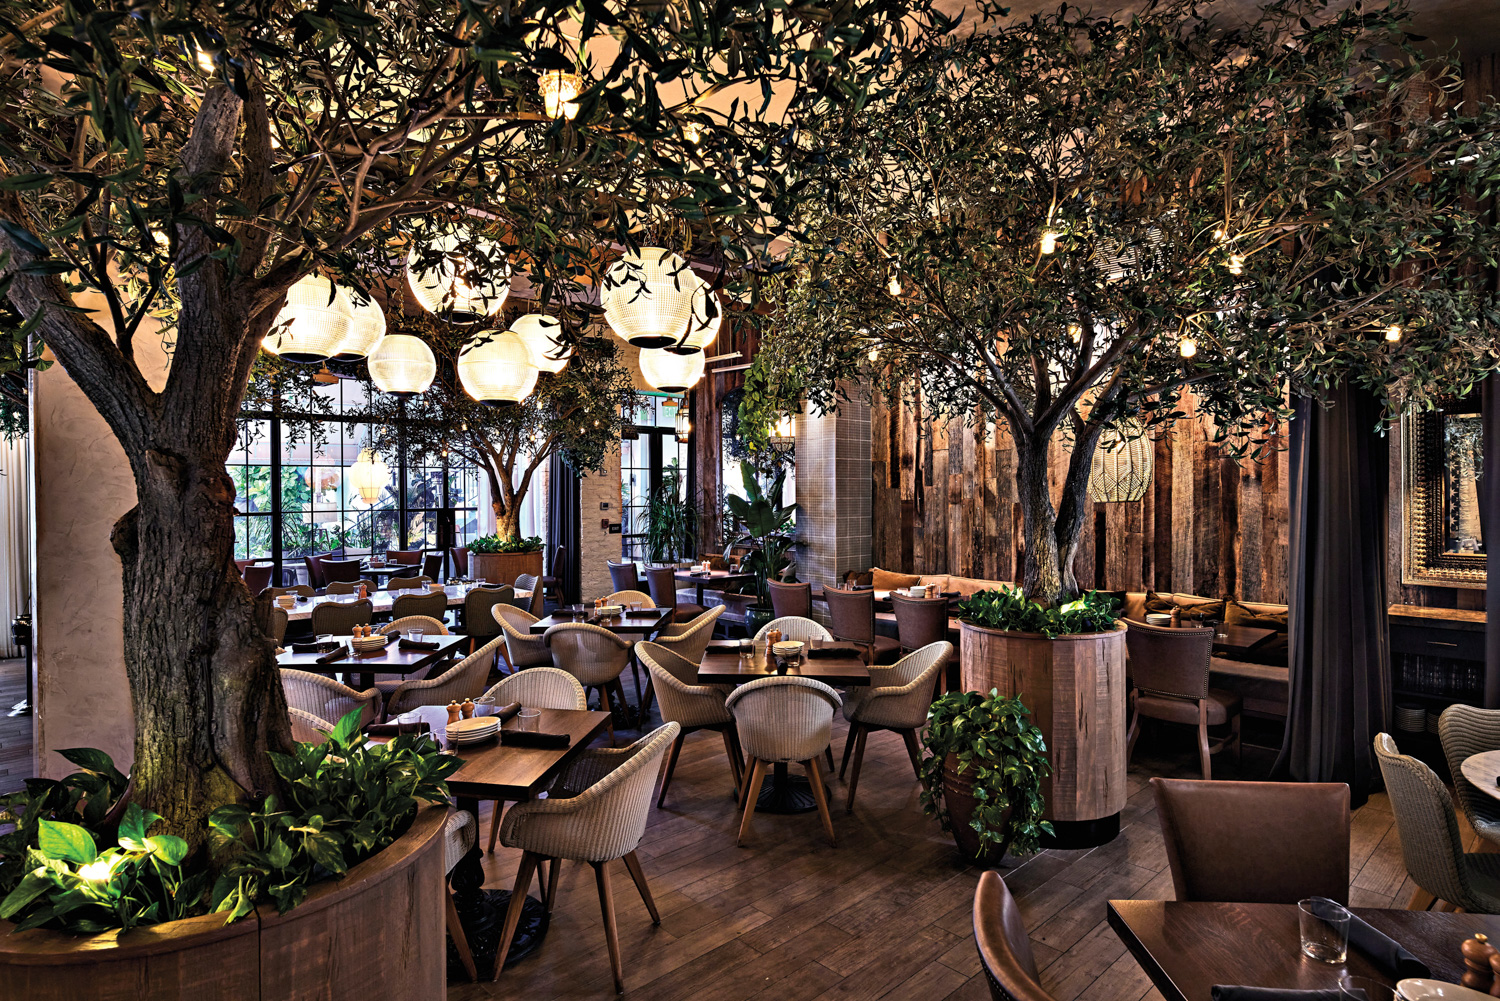 Globe lamps hang from the ceilings of this Miami restaurant dining room with potted olive trees